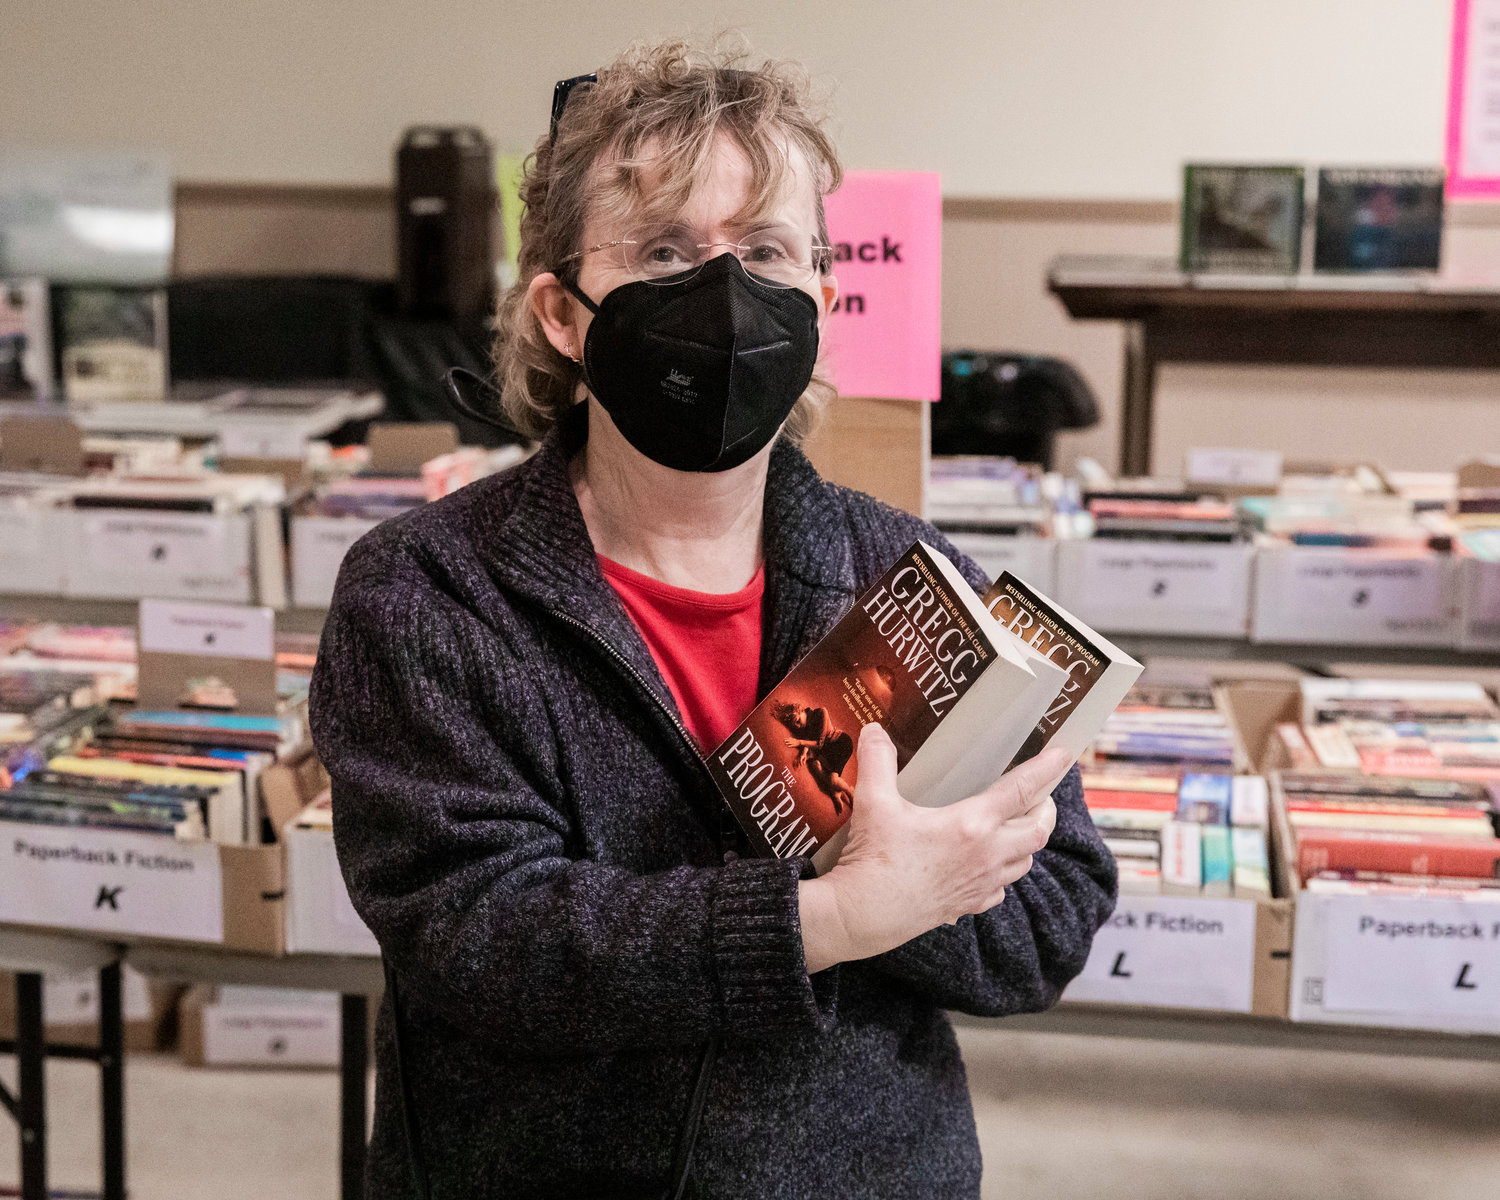 Cathy Cavness holds up books she plans to bring home from the AAUW Used Book Sale at the Moose Lodge in Centralia on Tuesday.